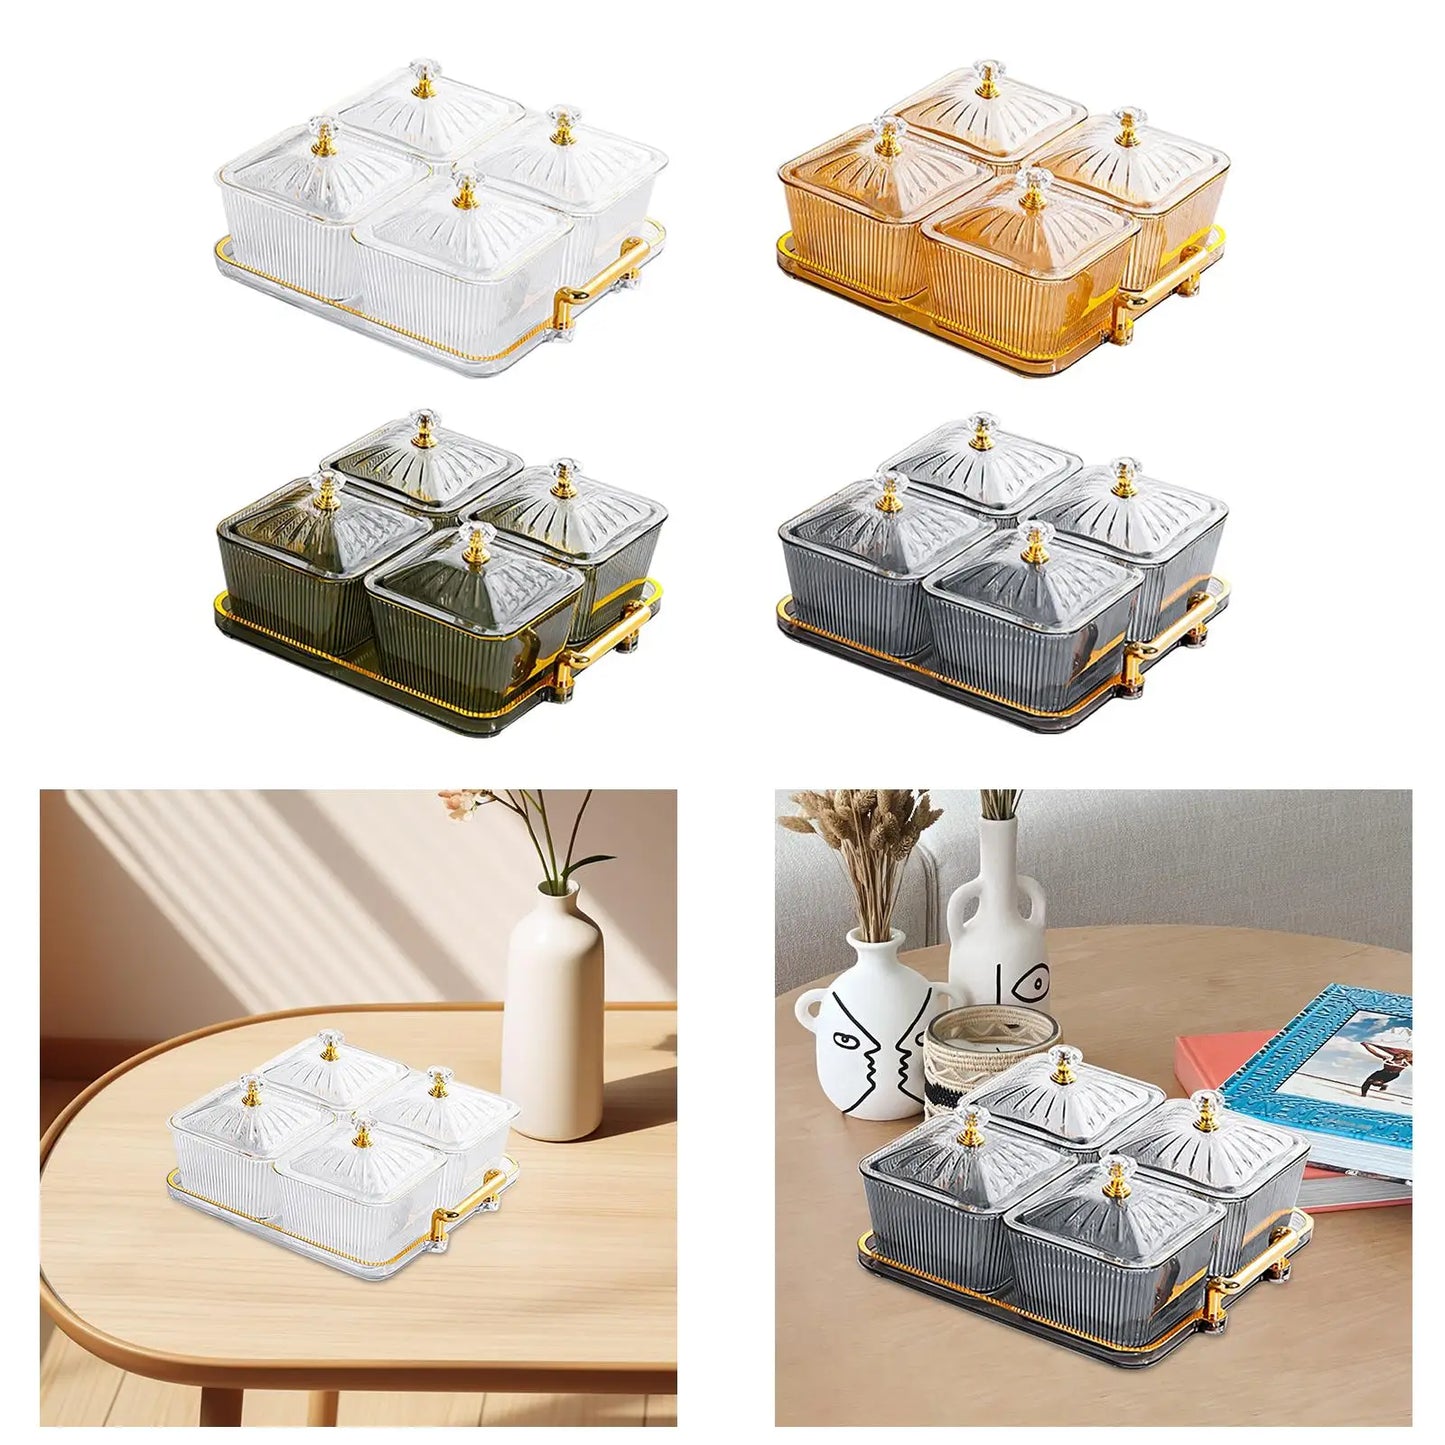 Modern Divided Serving Dishes with Tray